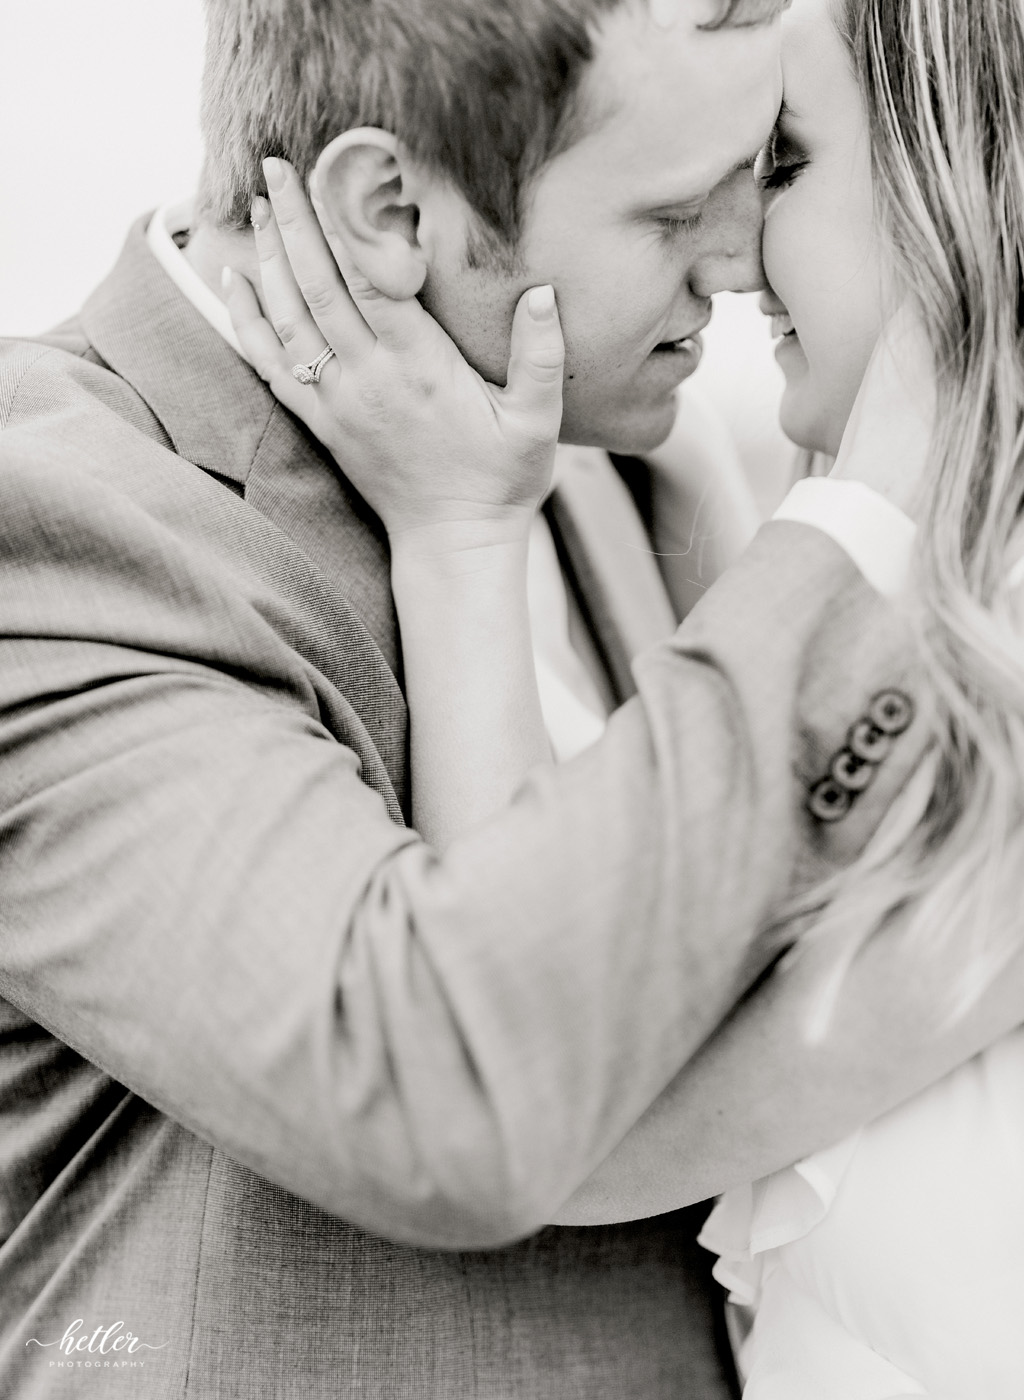 West Michigan intimate wedding photographer for a small March wedding